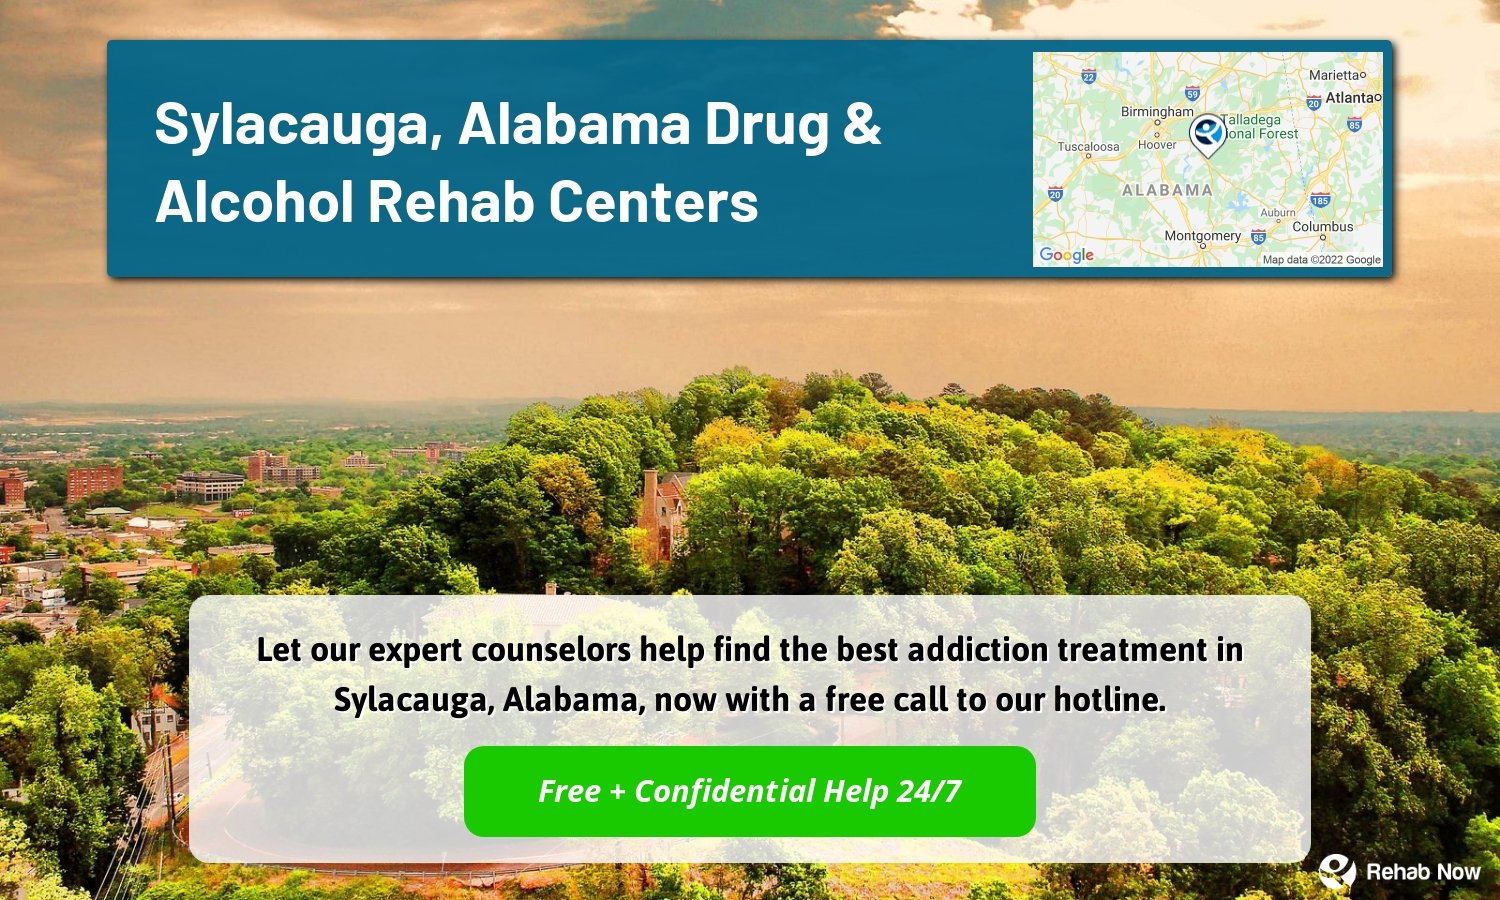 Let our expert counselors help find the best addiction treatment in Sylacauga, Alabama, now with a free call to our hotline.